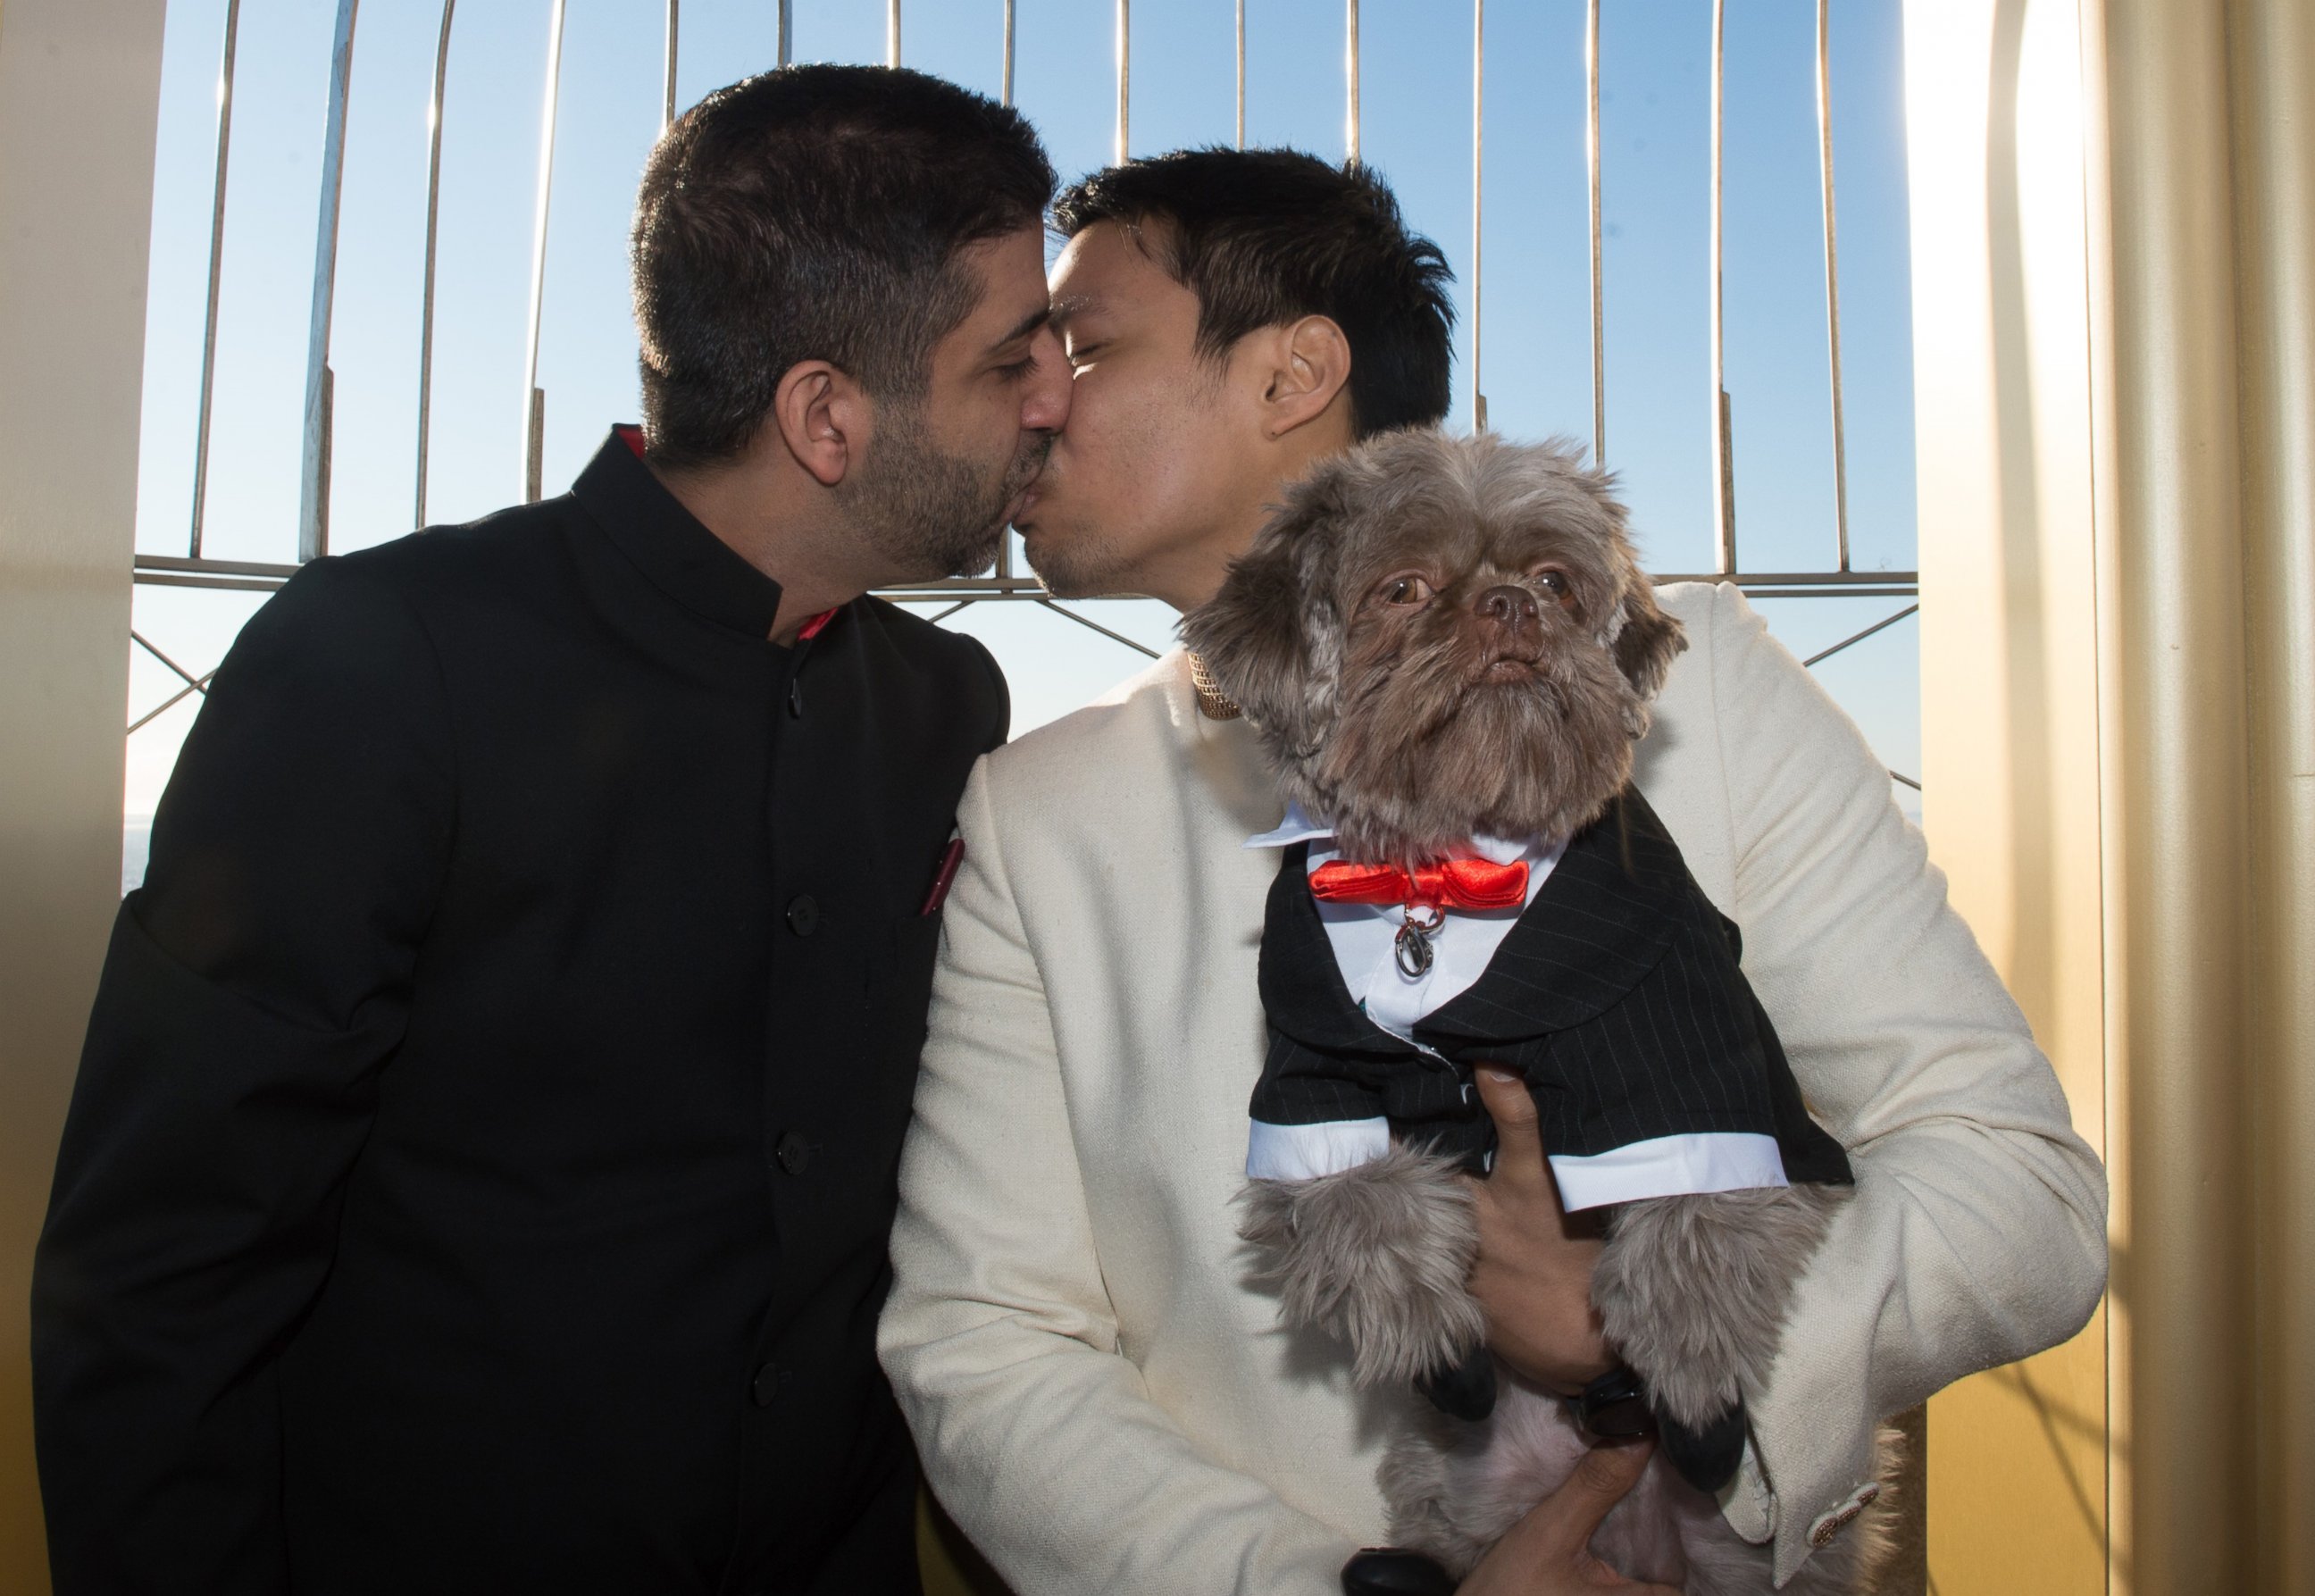 PHOTO: Vijay Lalwani and Hector Jerome Bondoc of New York, NY are married as the Empire State Building hosts Valentine's Day Weddings, Feb. 14, 2016.